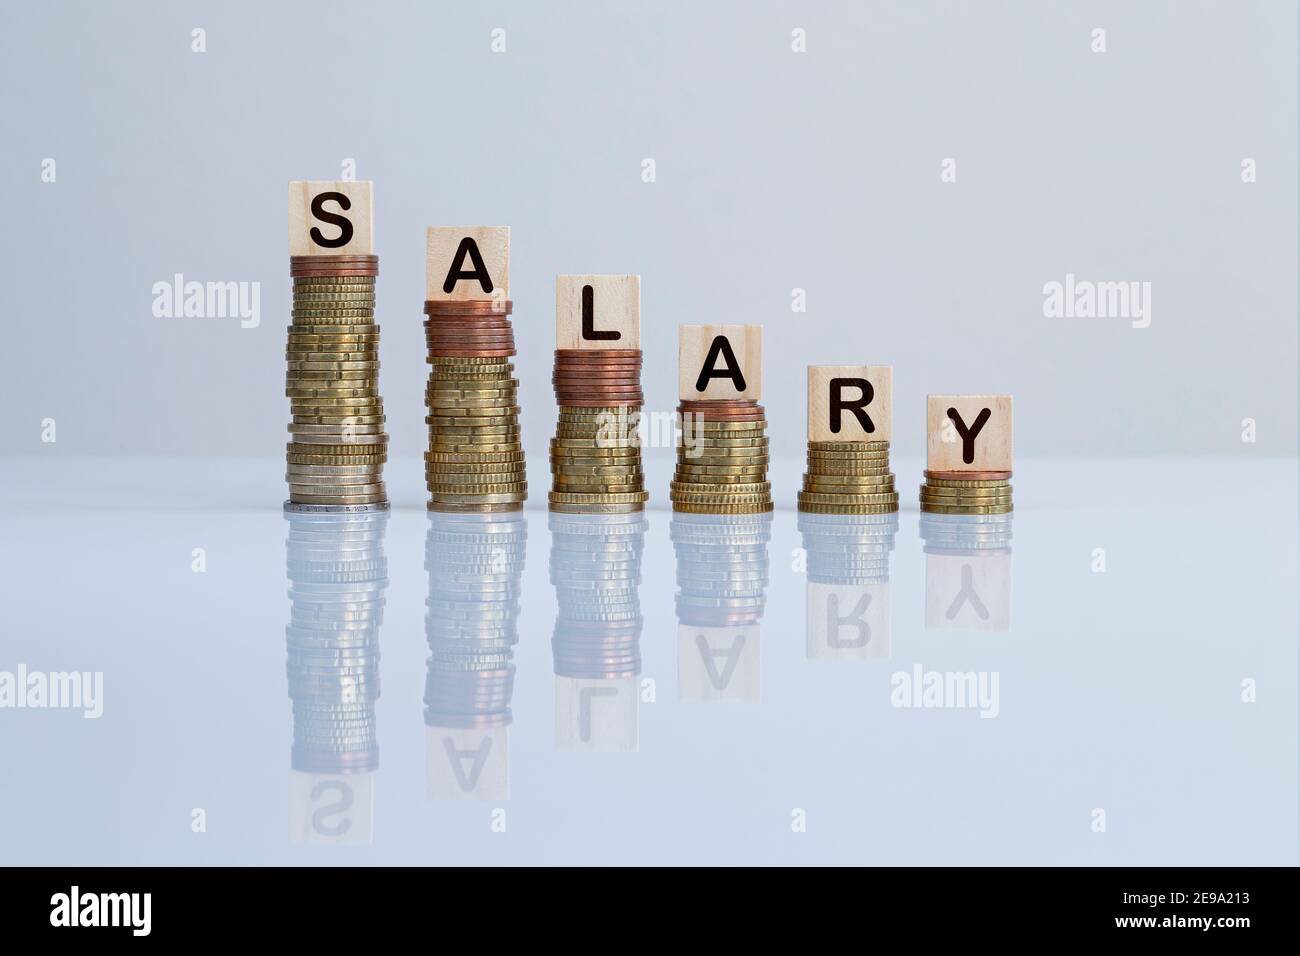 Word 'SALARY' on wooden blocks on top of descending stacks of coins on gray. Concept photo of losing money, economic crisis, recession and failure. Stock Photo